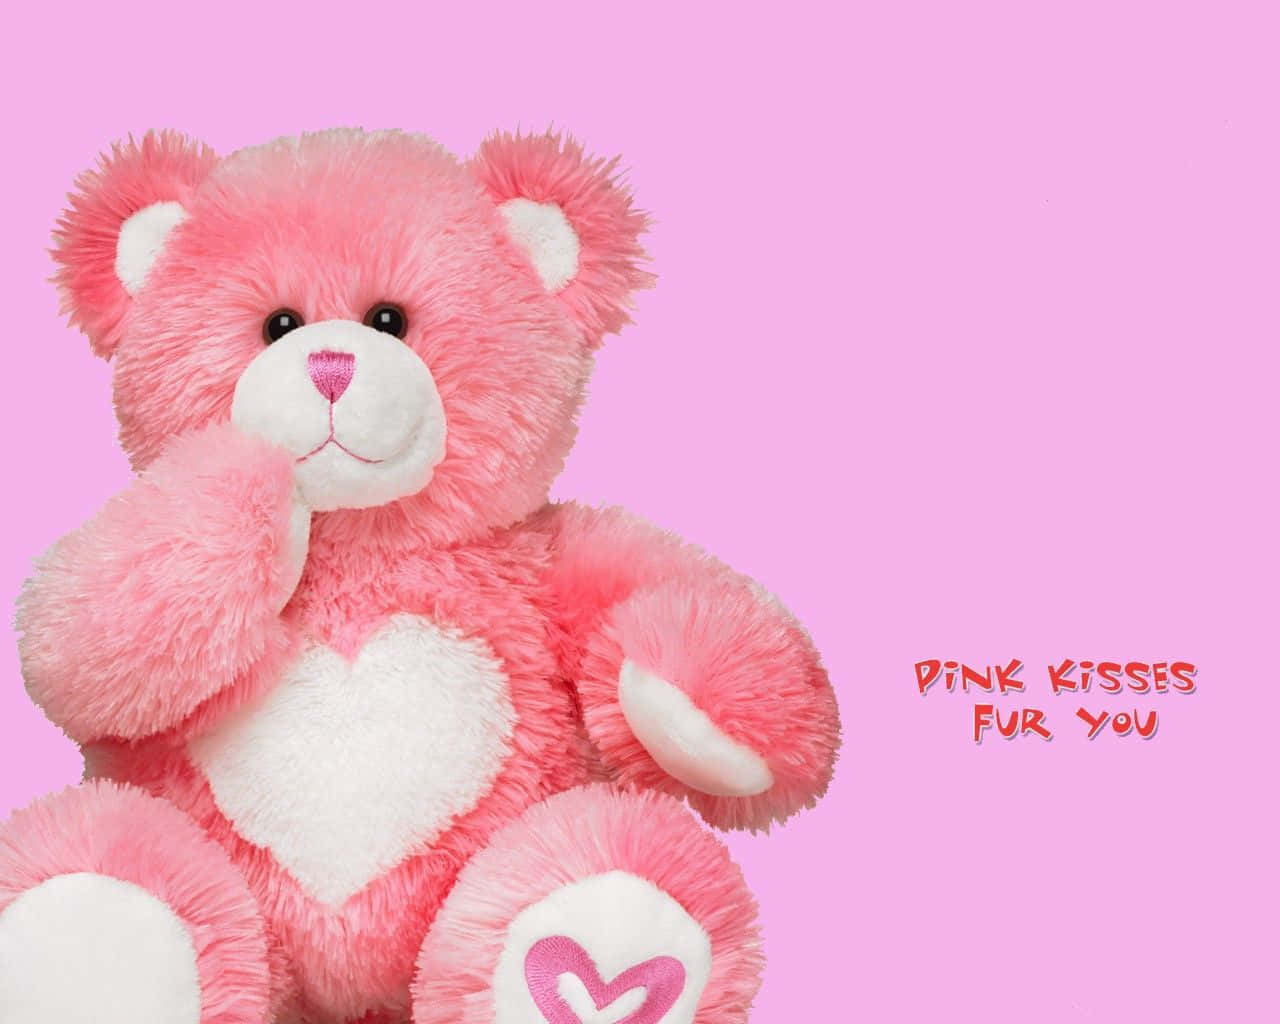 Cute Pink Teddy Bear Kisses Valentine's Day